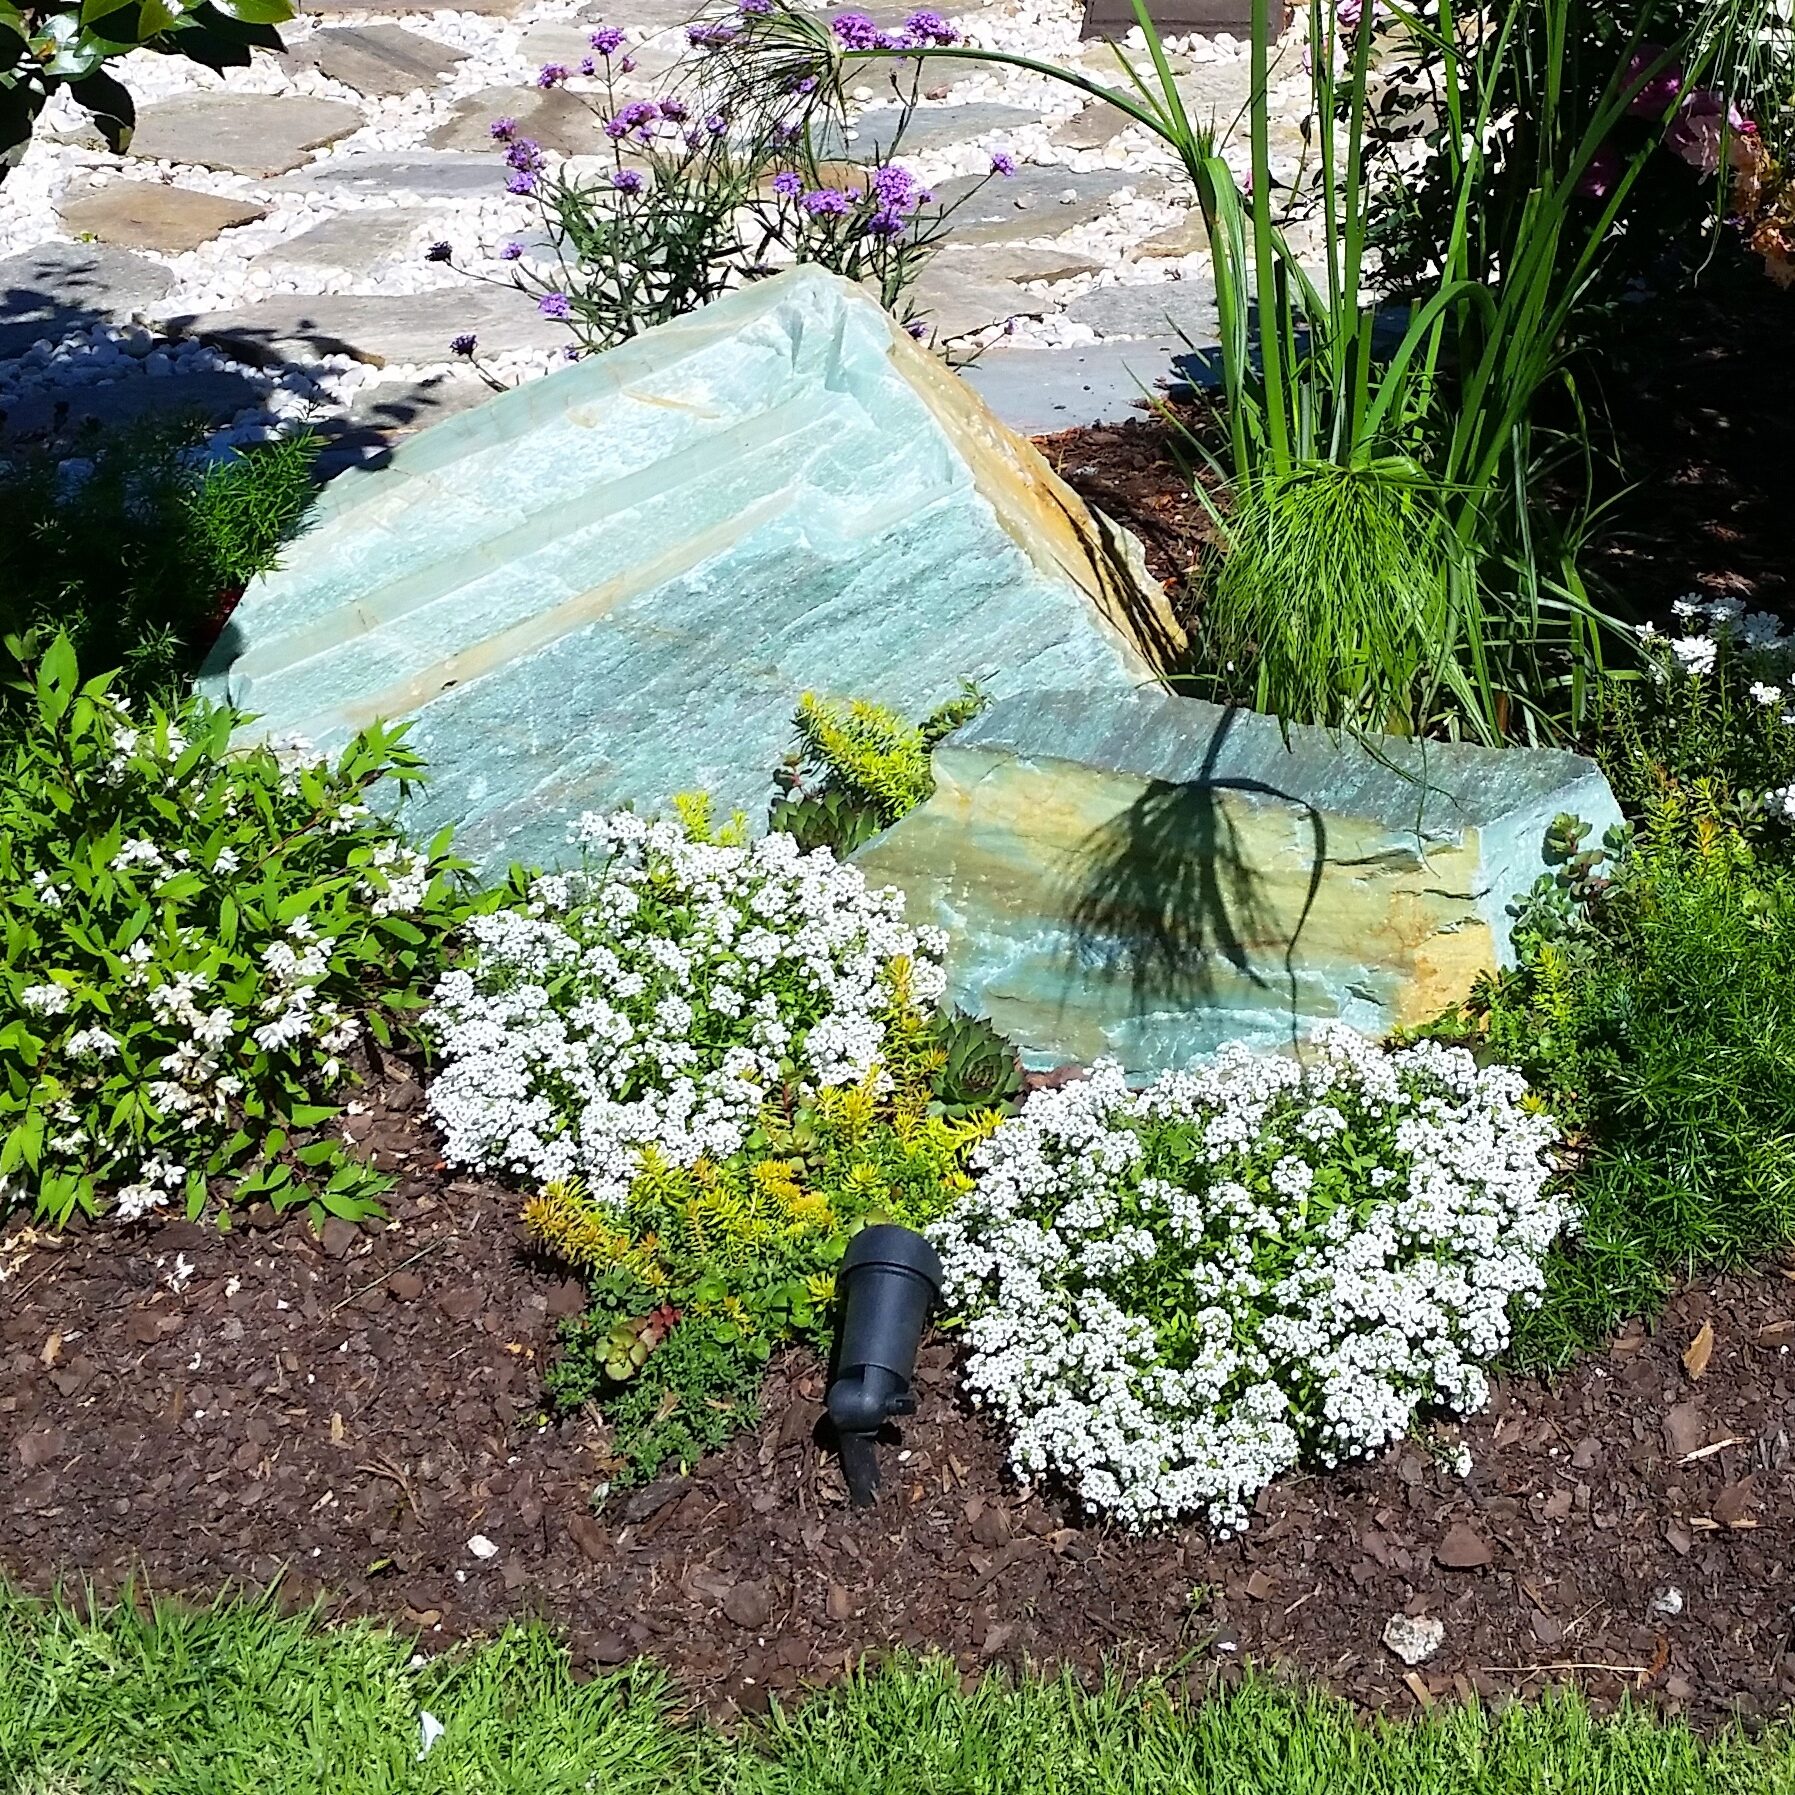 large turquoise green stone boulder in a garden with flowers